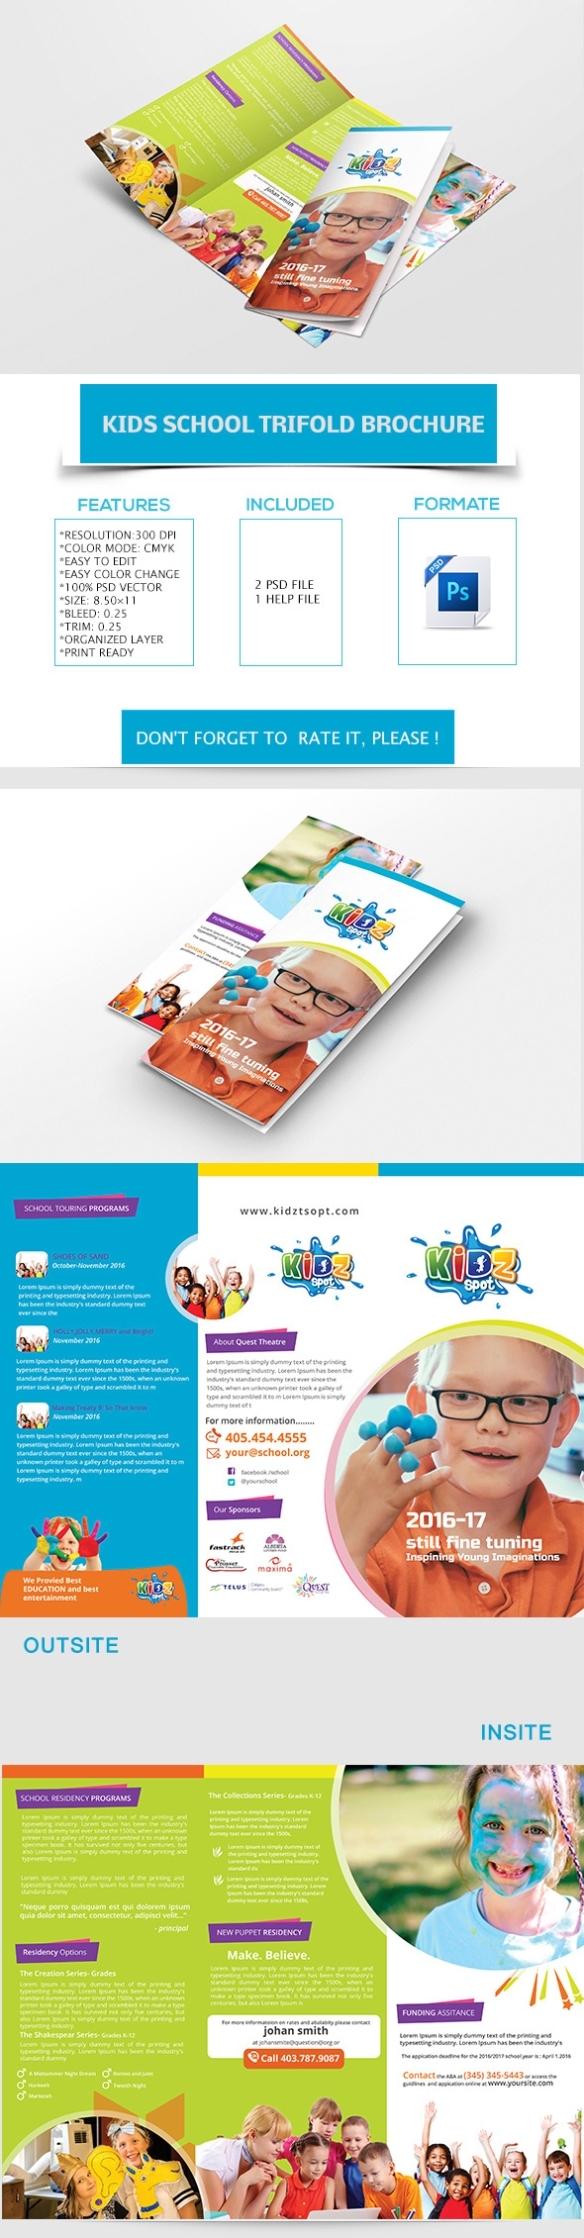 Kid'S School Trifold Brochure Template (Free Download) On Behance In Brochure Templates For School Project